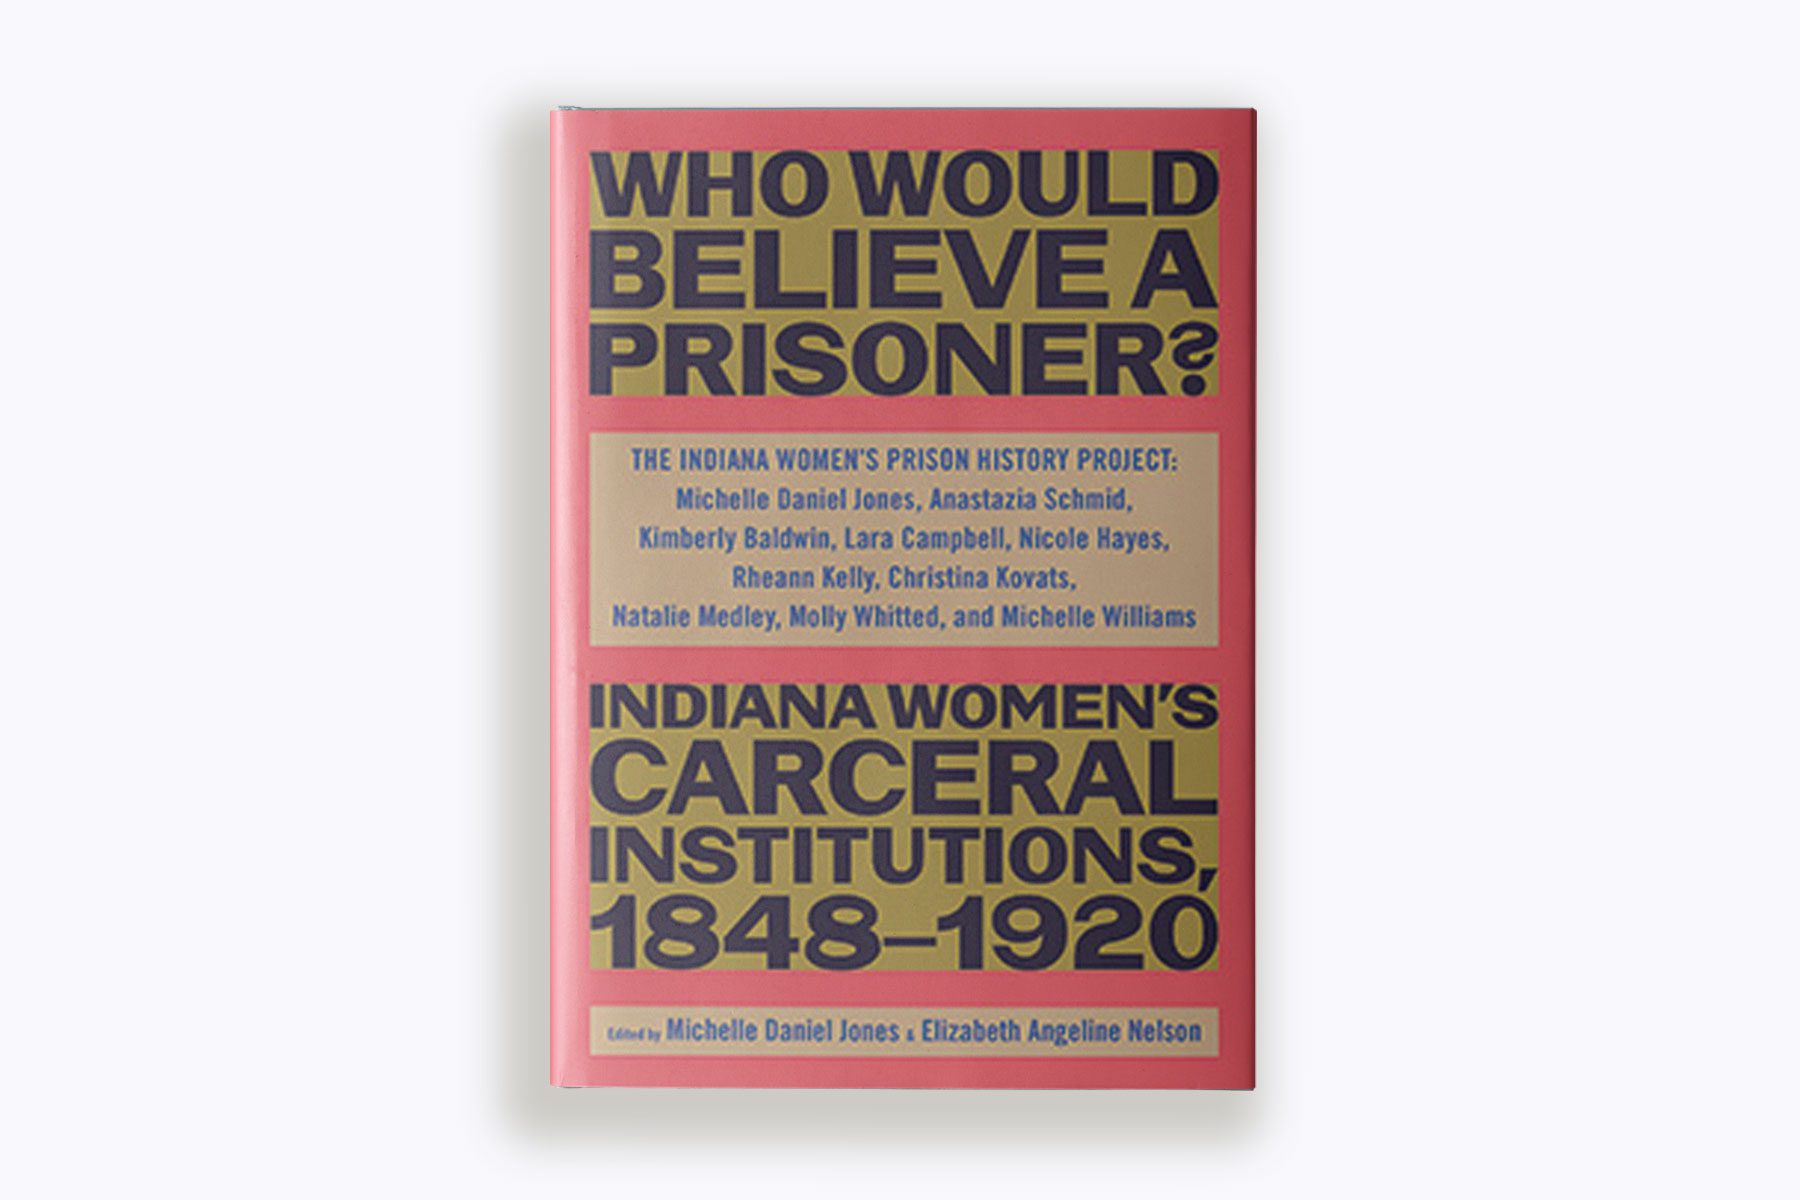 A photo illustration of "Who would believe a prisoner?" book cover.